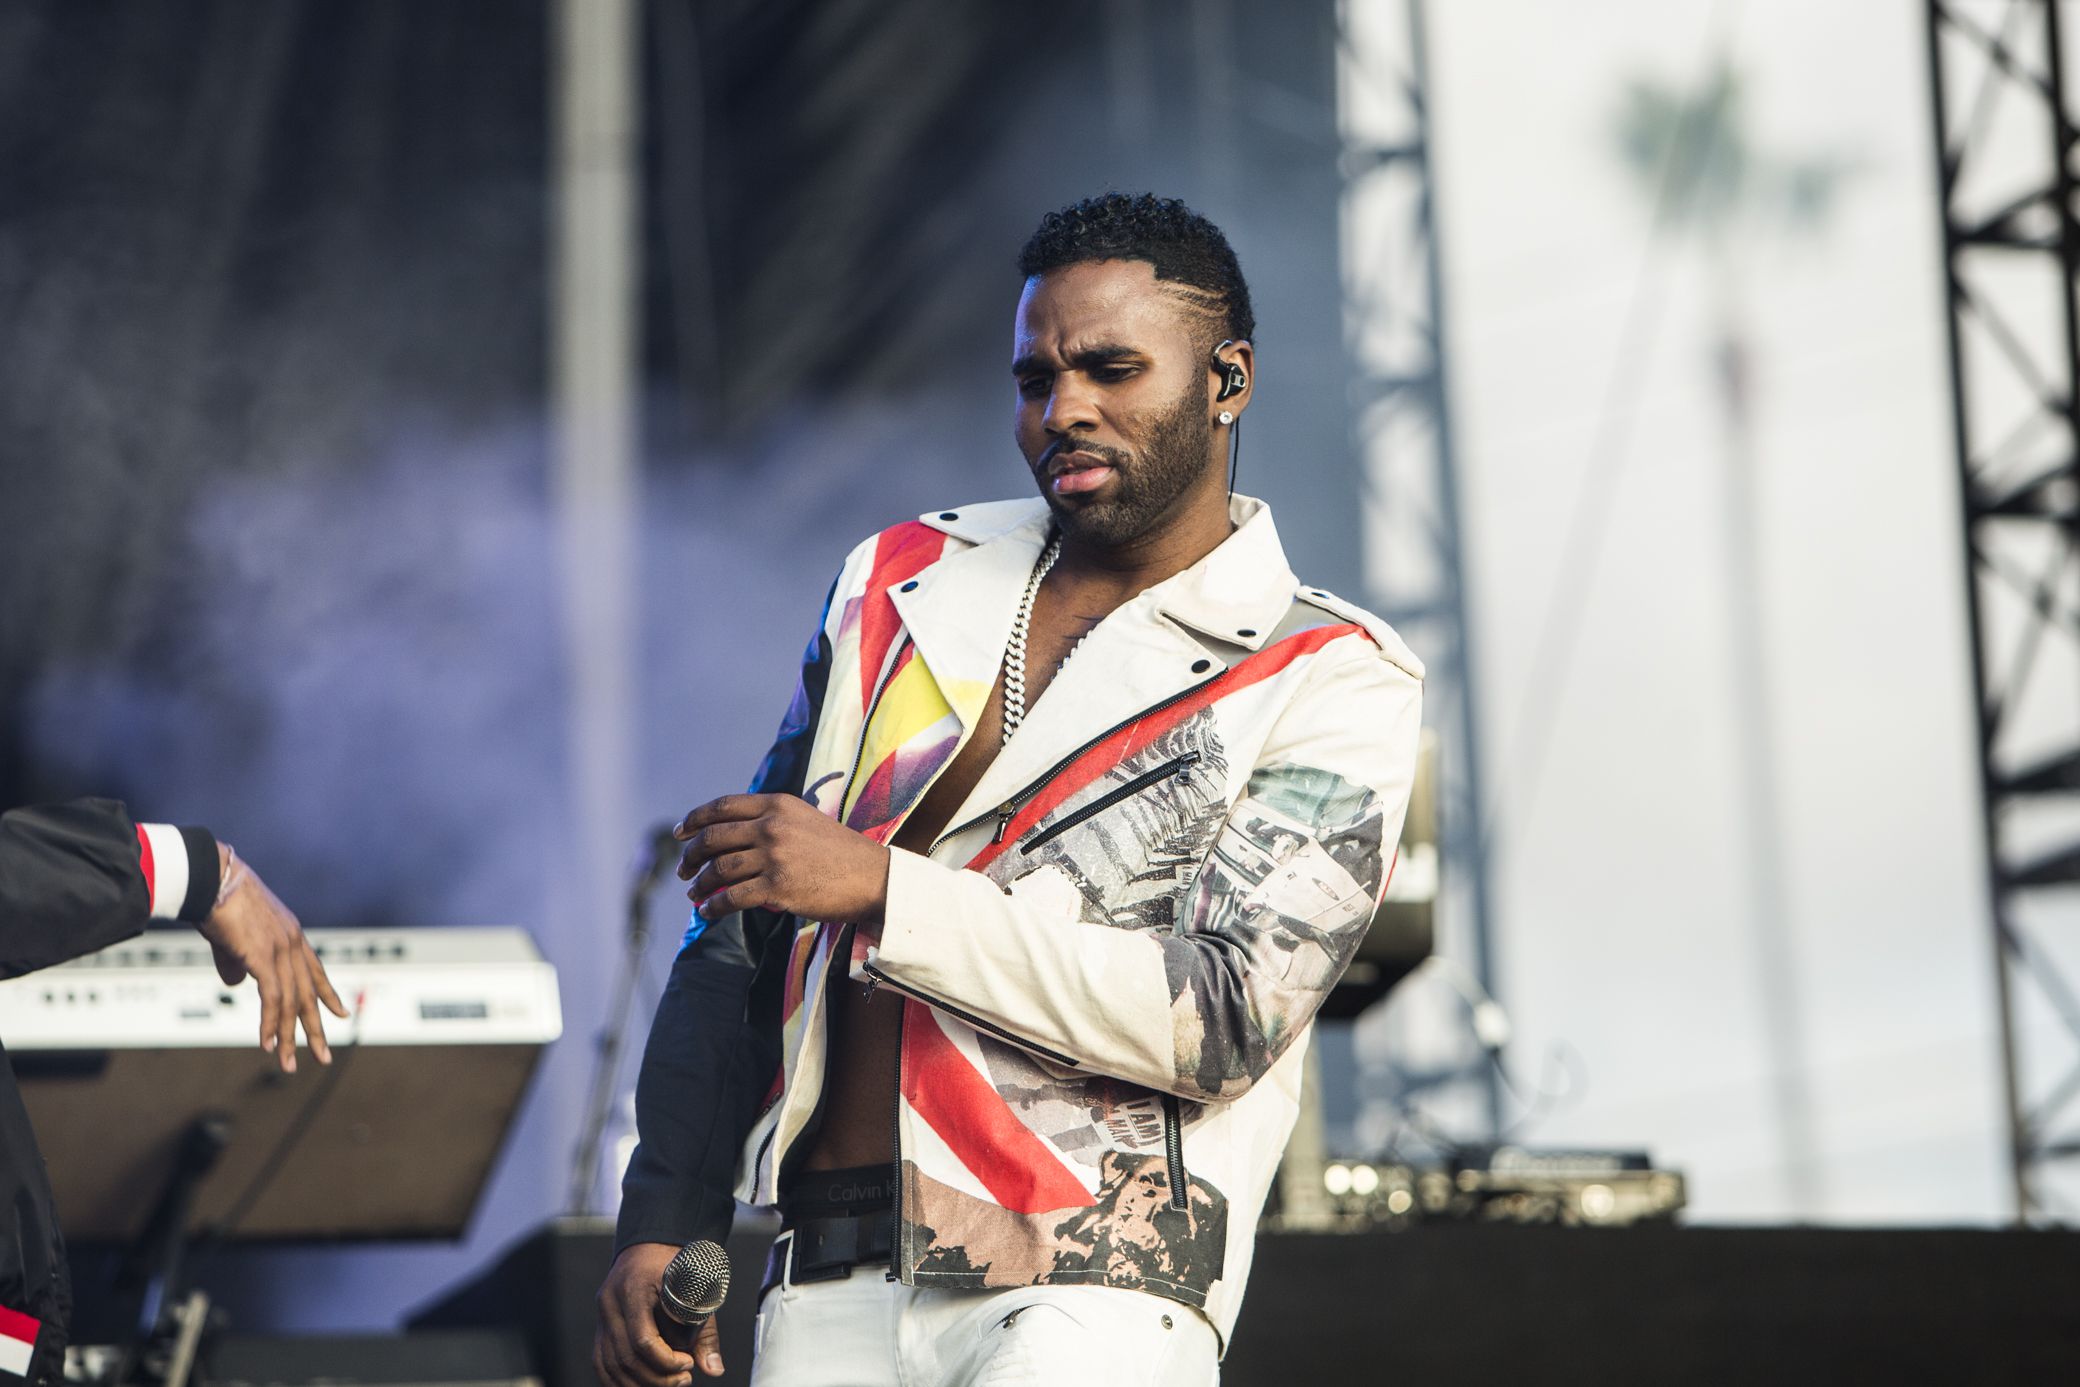 jason derulo 9 KAABOO Del Mar Succeeds at Being a Festival for Everyone